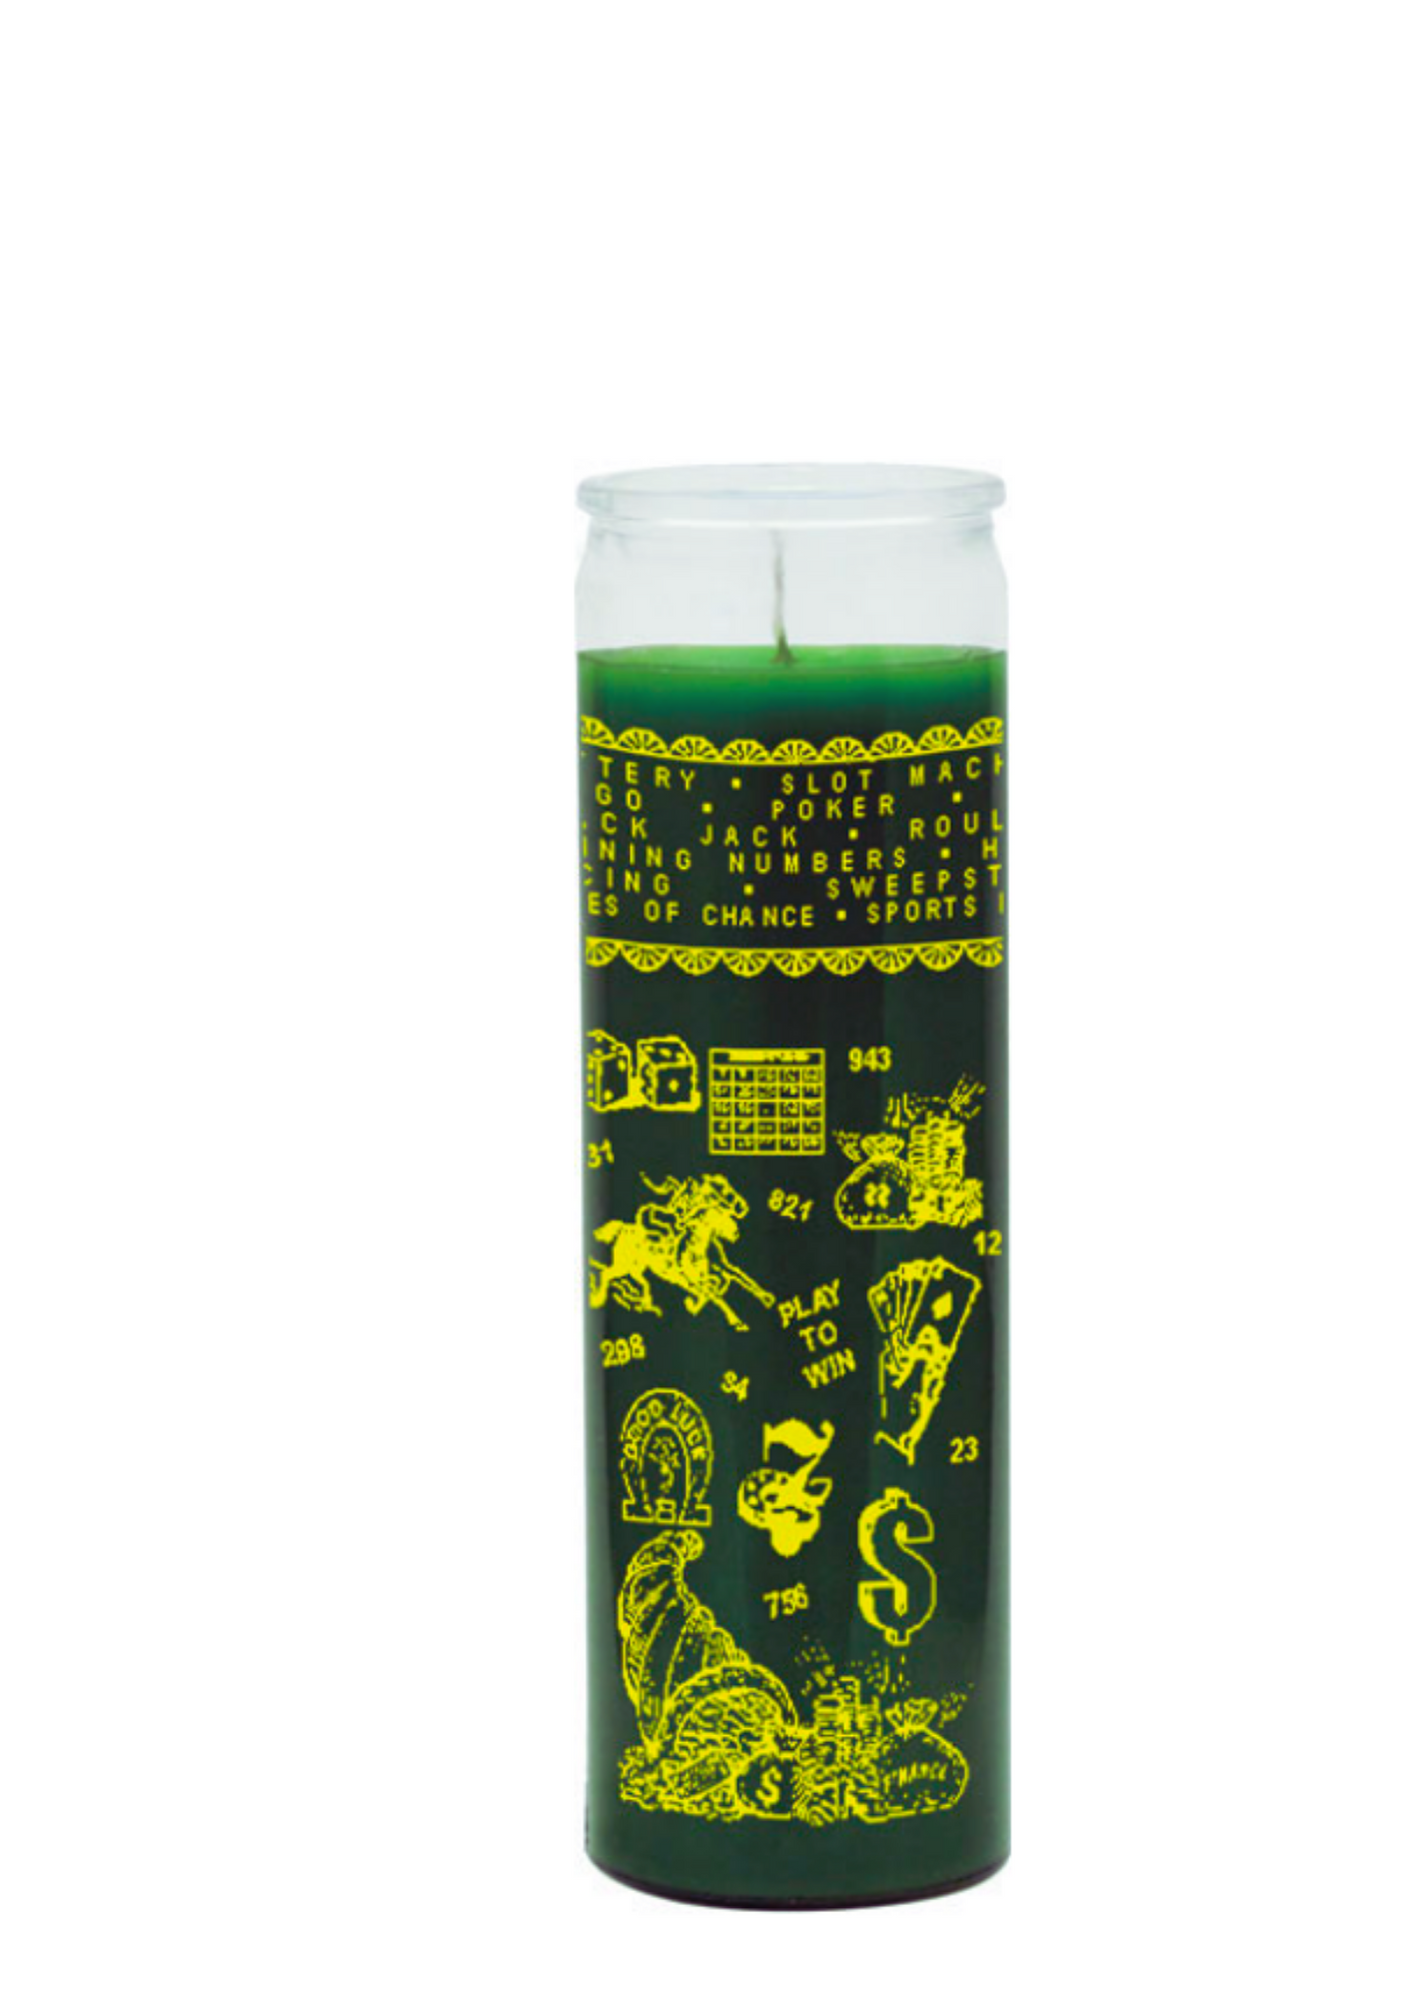 Casino & gambler (green) 1 color 7 day candle